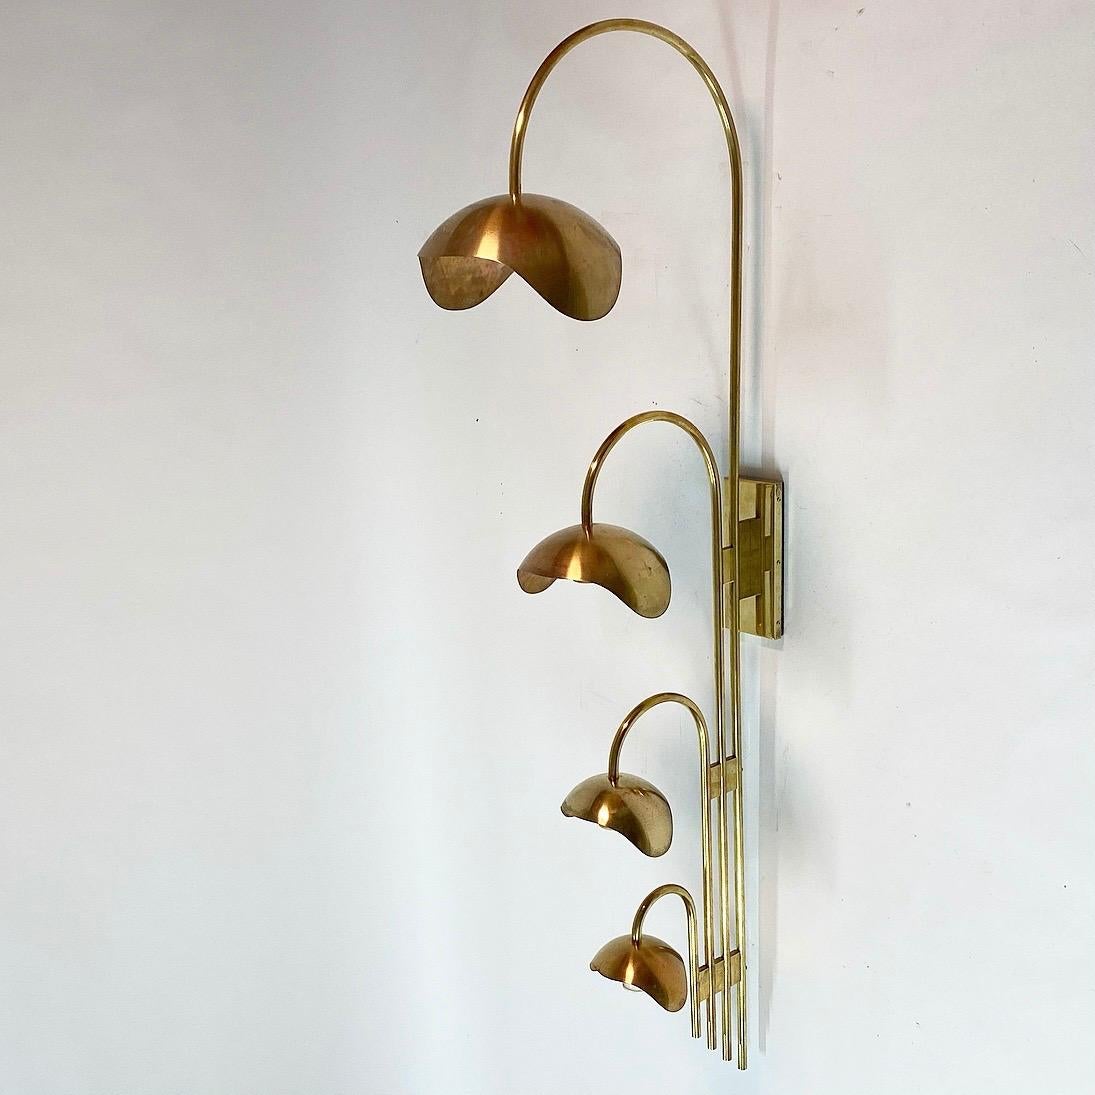 Elegant, majestic and huge in size is this solid brass wall sculpture with four-light sources. 

Almost certain that this lights was designed by Palle Suenson in the 1940s. 

Palle Suenson, renowned Danish architect in 19th century made lighting